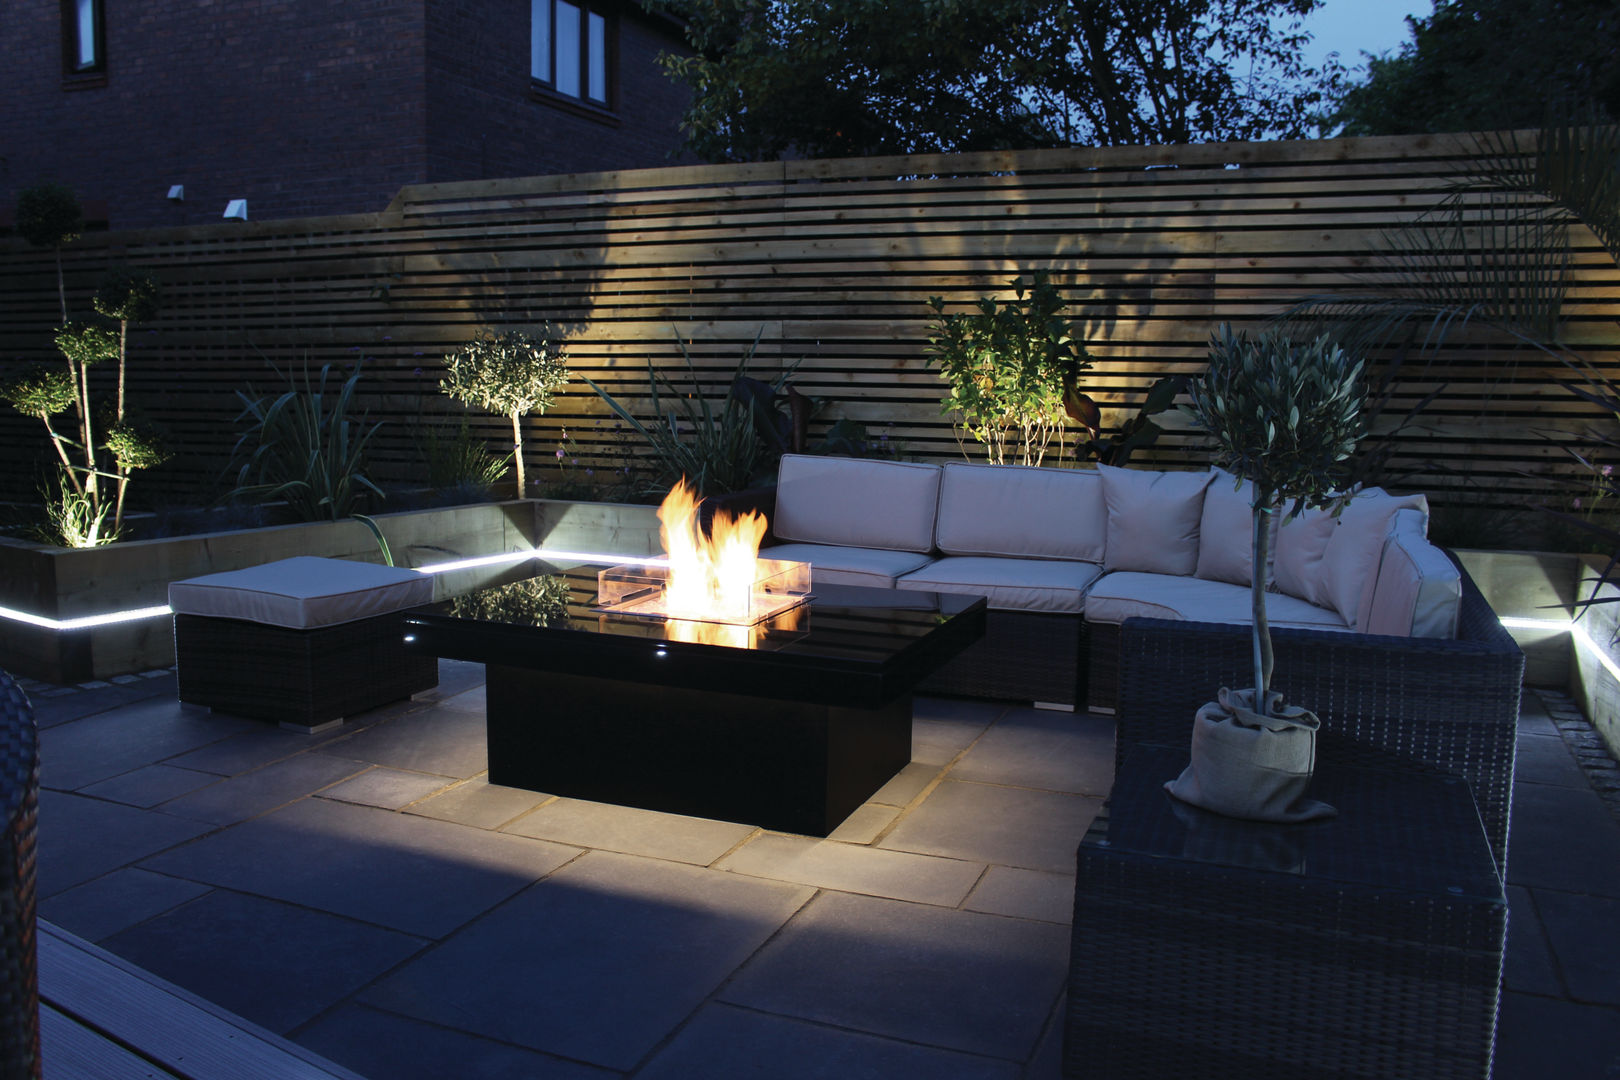 Madrid Gas Fire Table - Warrington Rivelin Modern style gardens Fire pits & barbecues